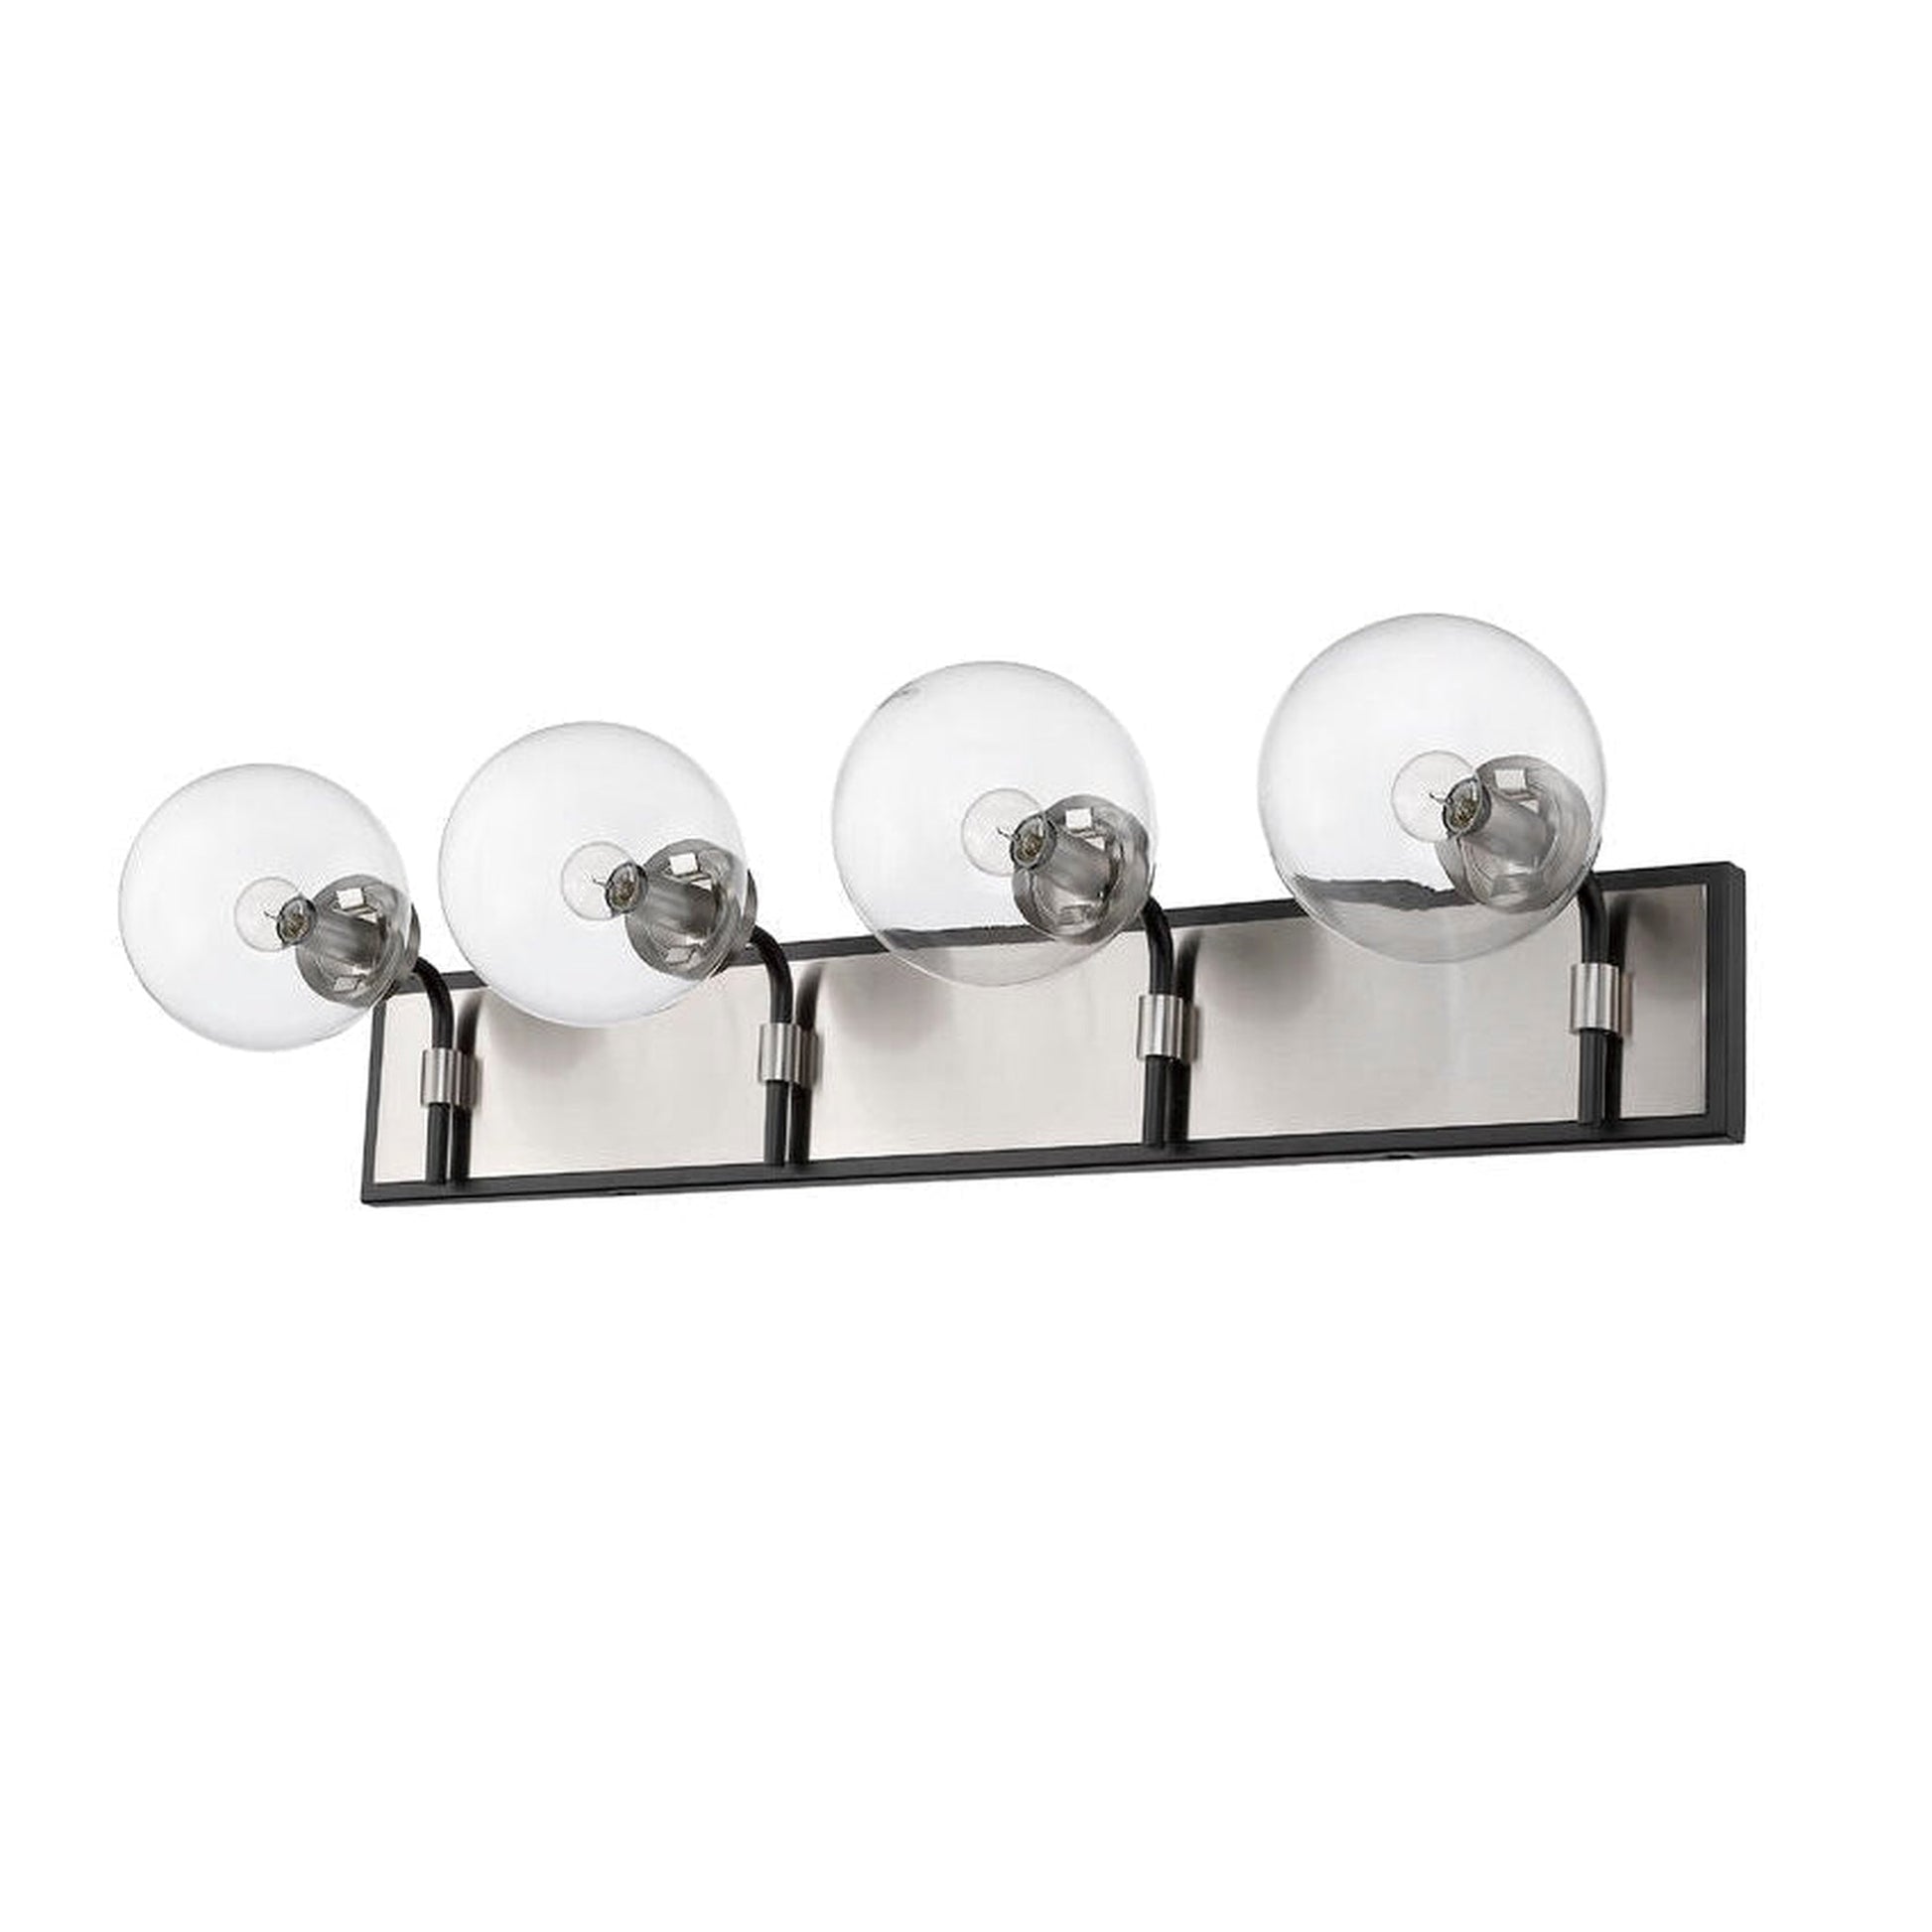 Z-Lite Parsons 33" 4-Light Matte Black and Brushed Nickel Vanity Light With Clear Glass Shade